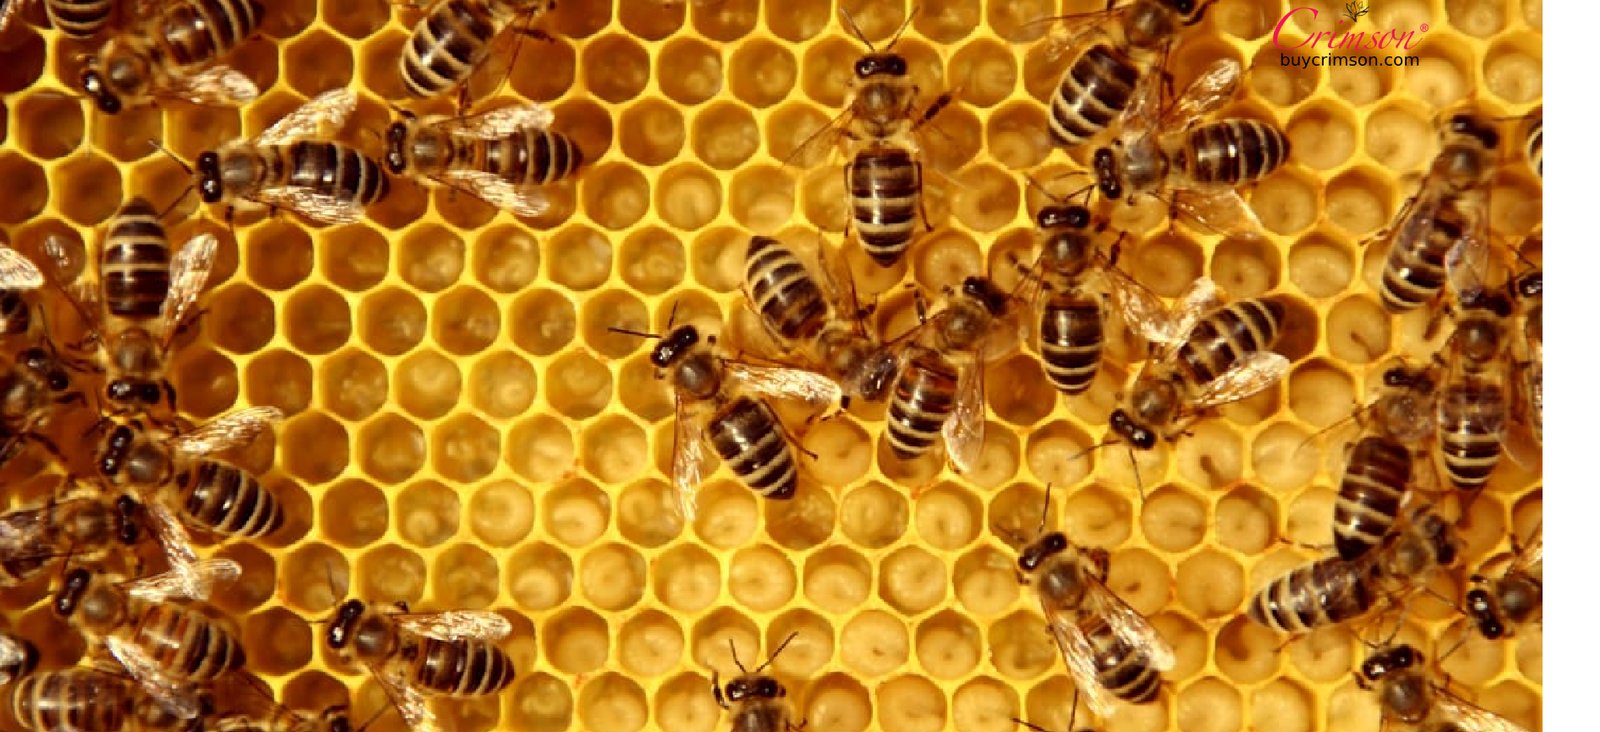 Benefits of Honey In Holy Quran and Ahadith